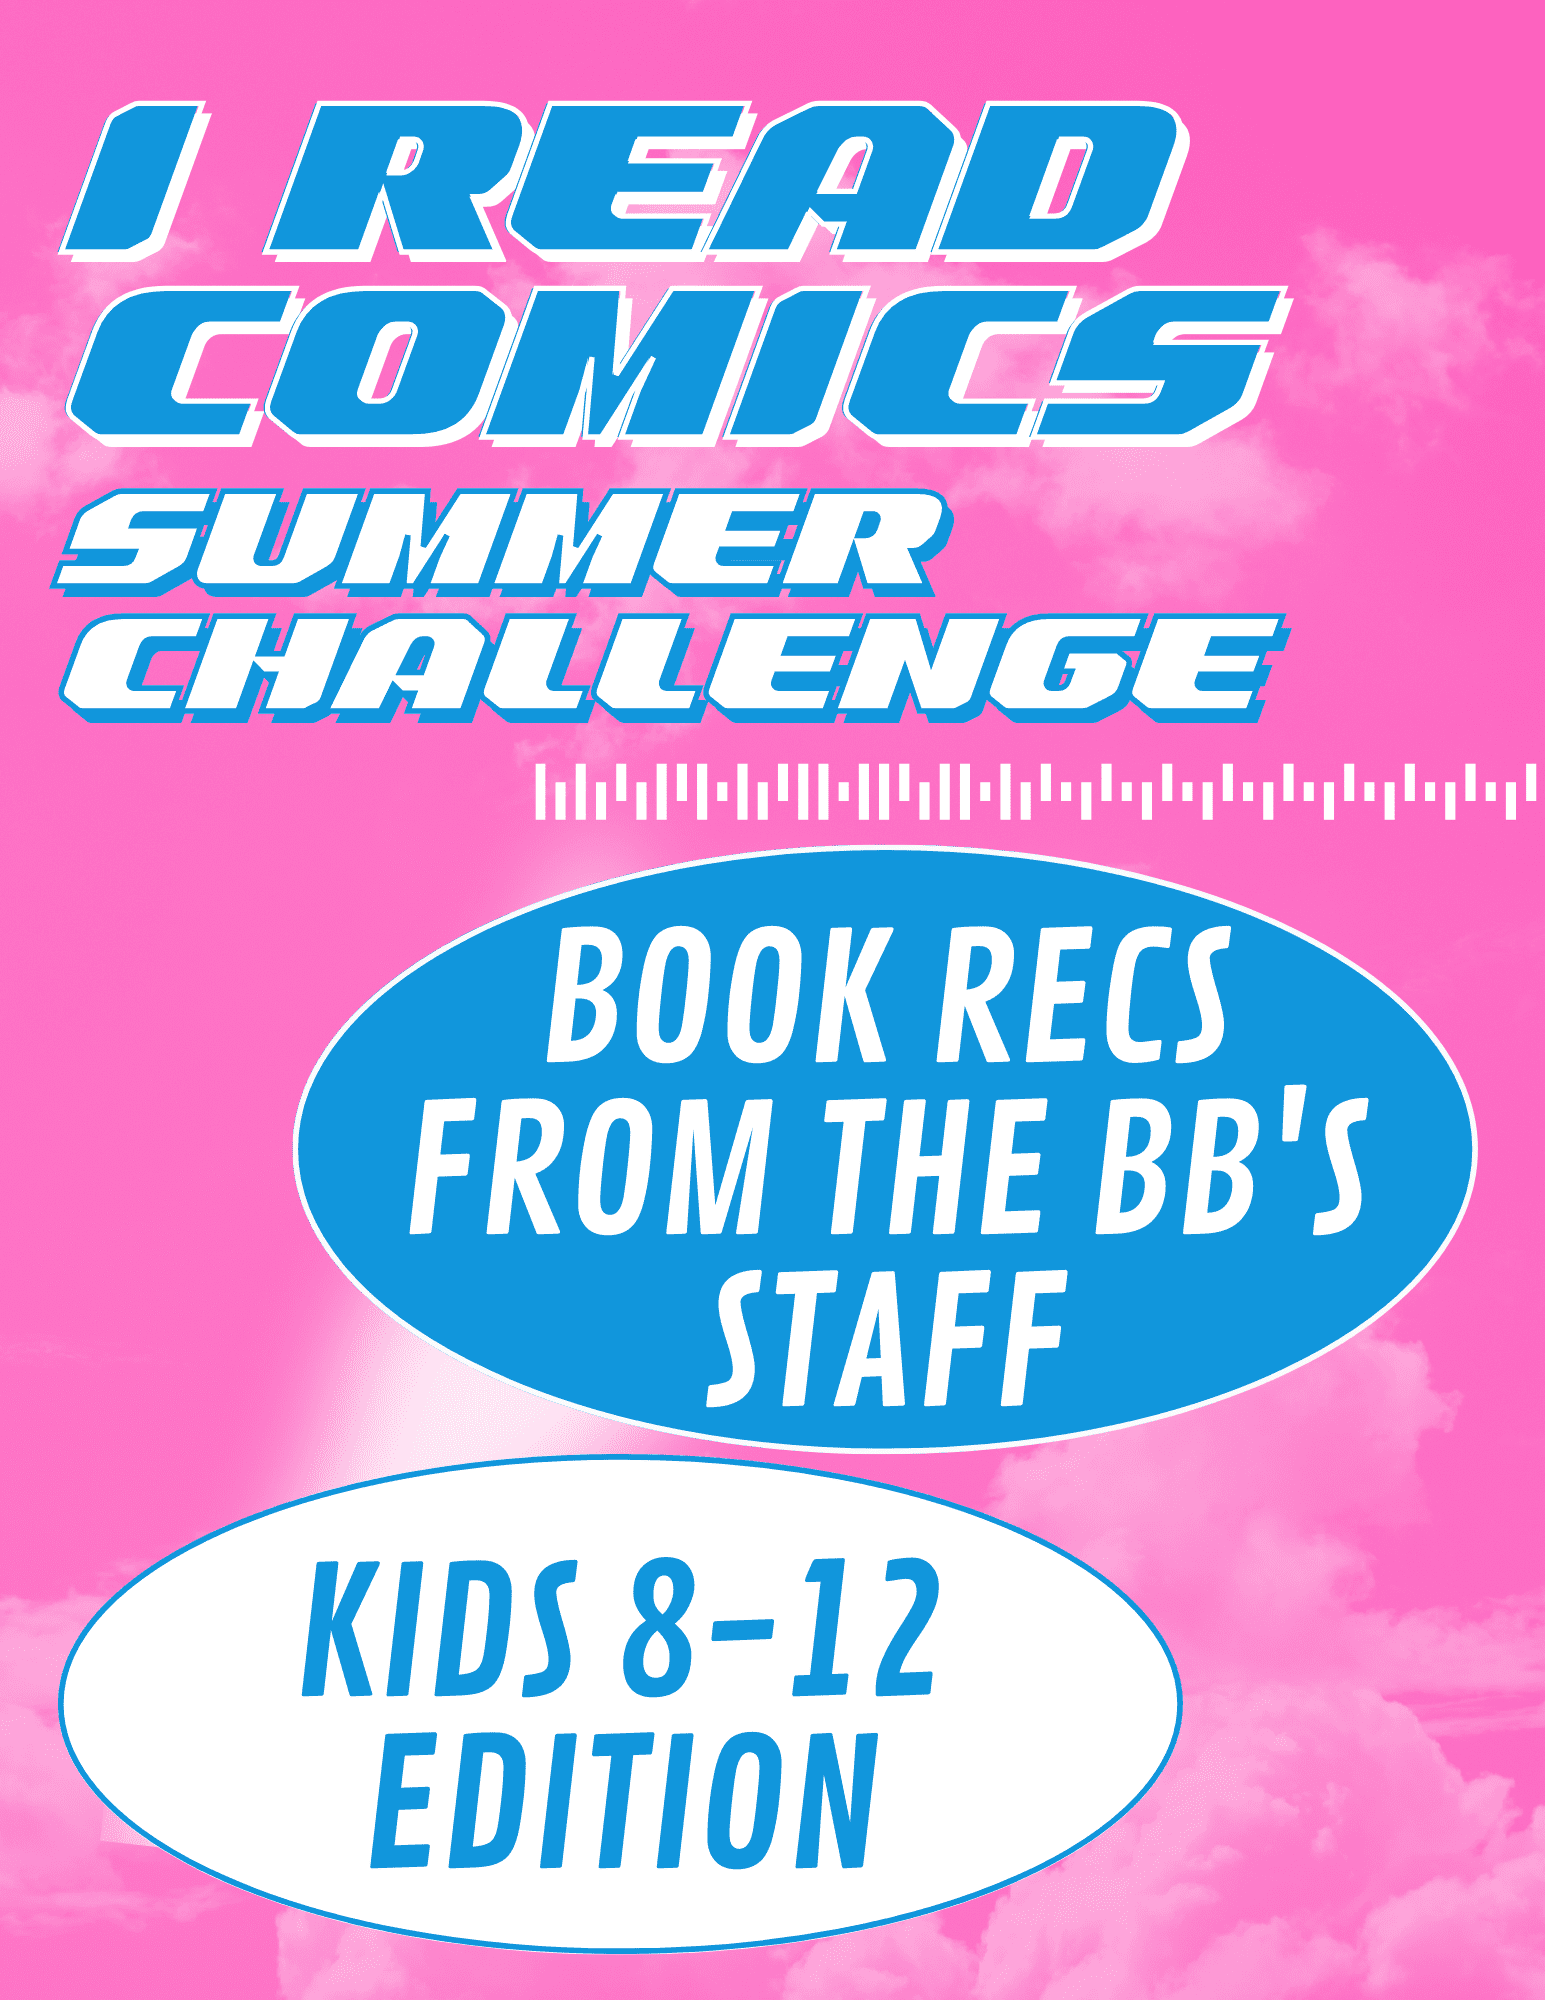 The Official “I Read Comics Summer Challenge” Recommendation List – Kid Edition!